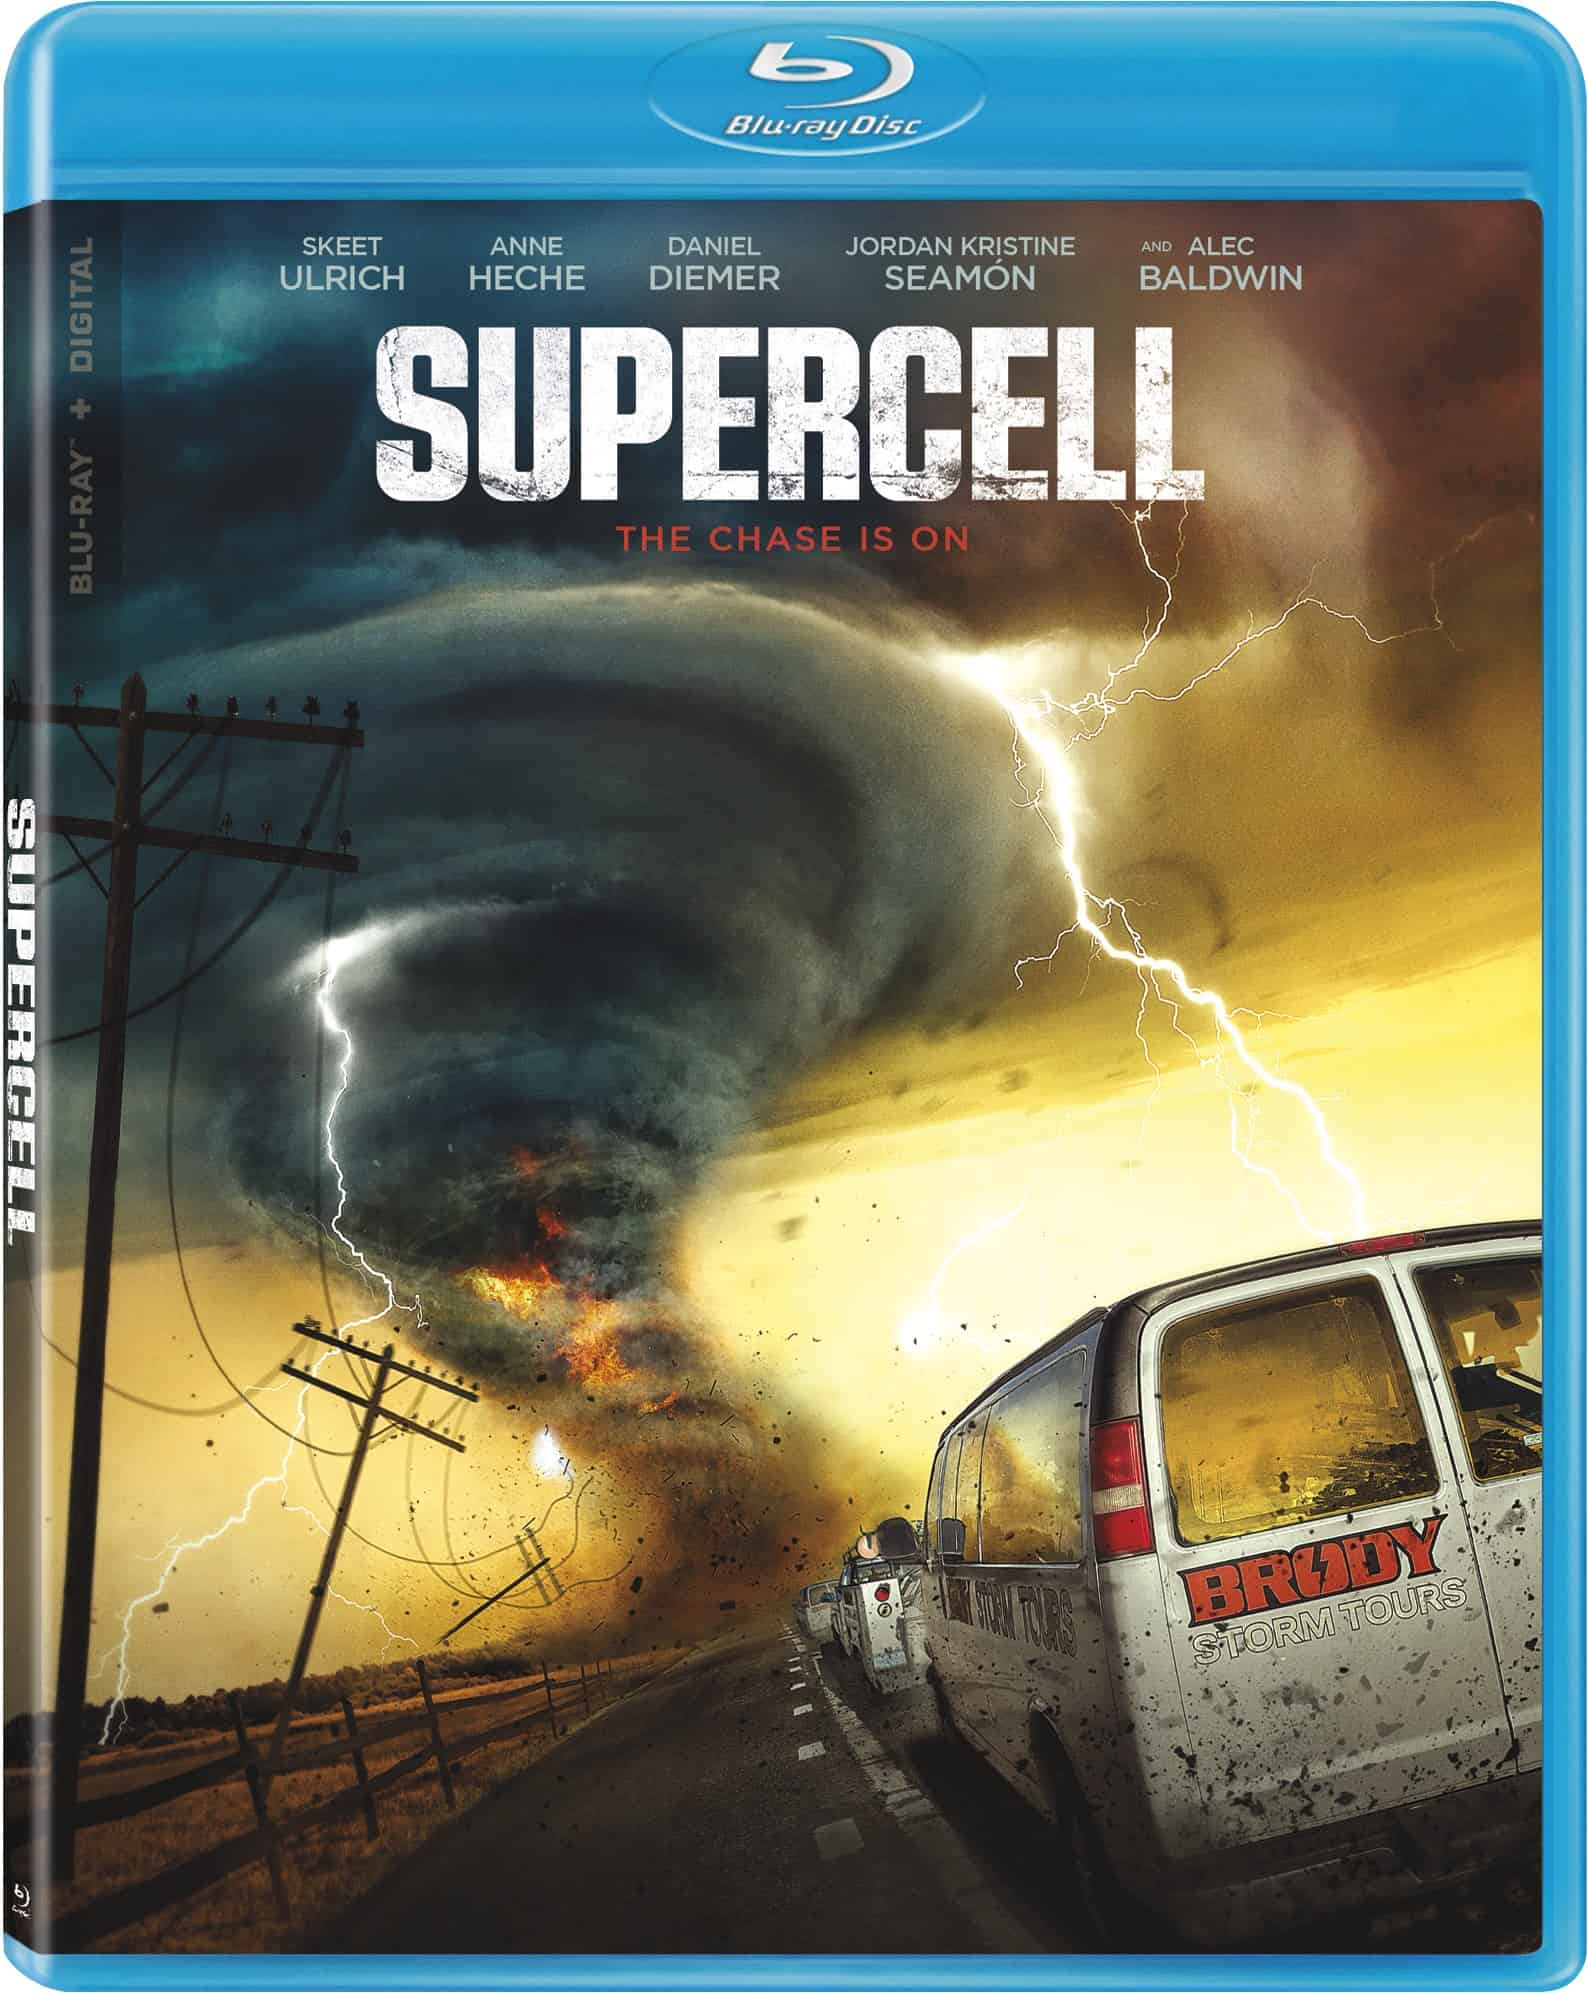 Supercell comes to Blu-ray on May 2nd 21